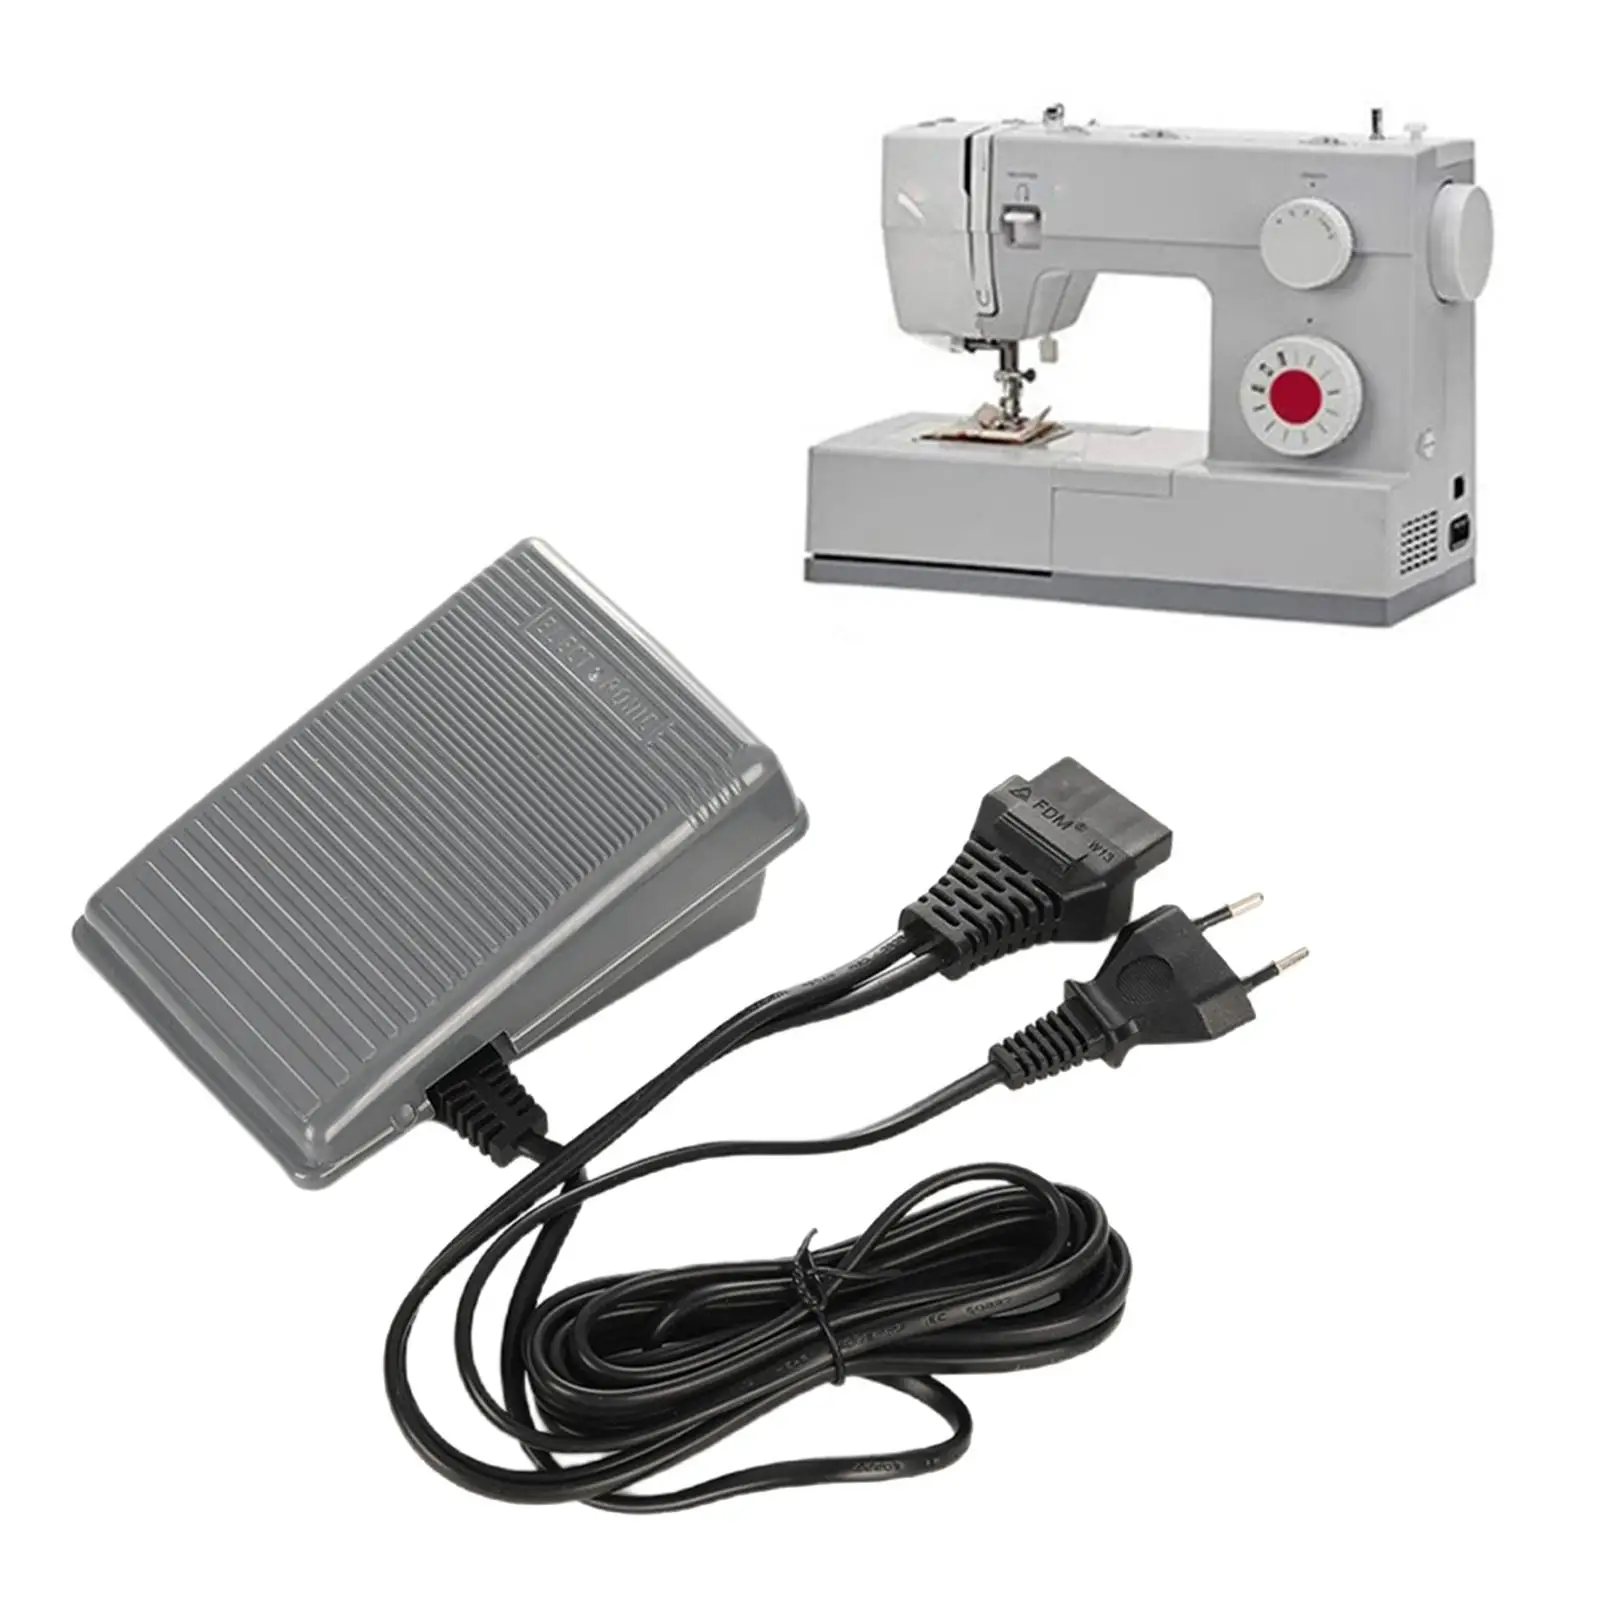 Speed Adjustor W/ Power Cord Motor Foot Pedal Controller Switch for Sewing Machine